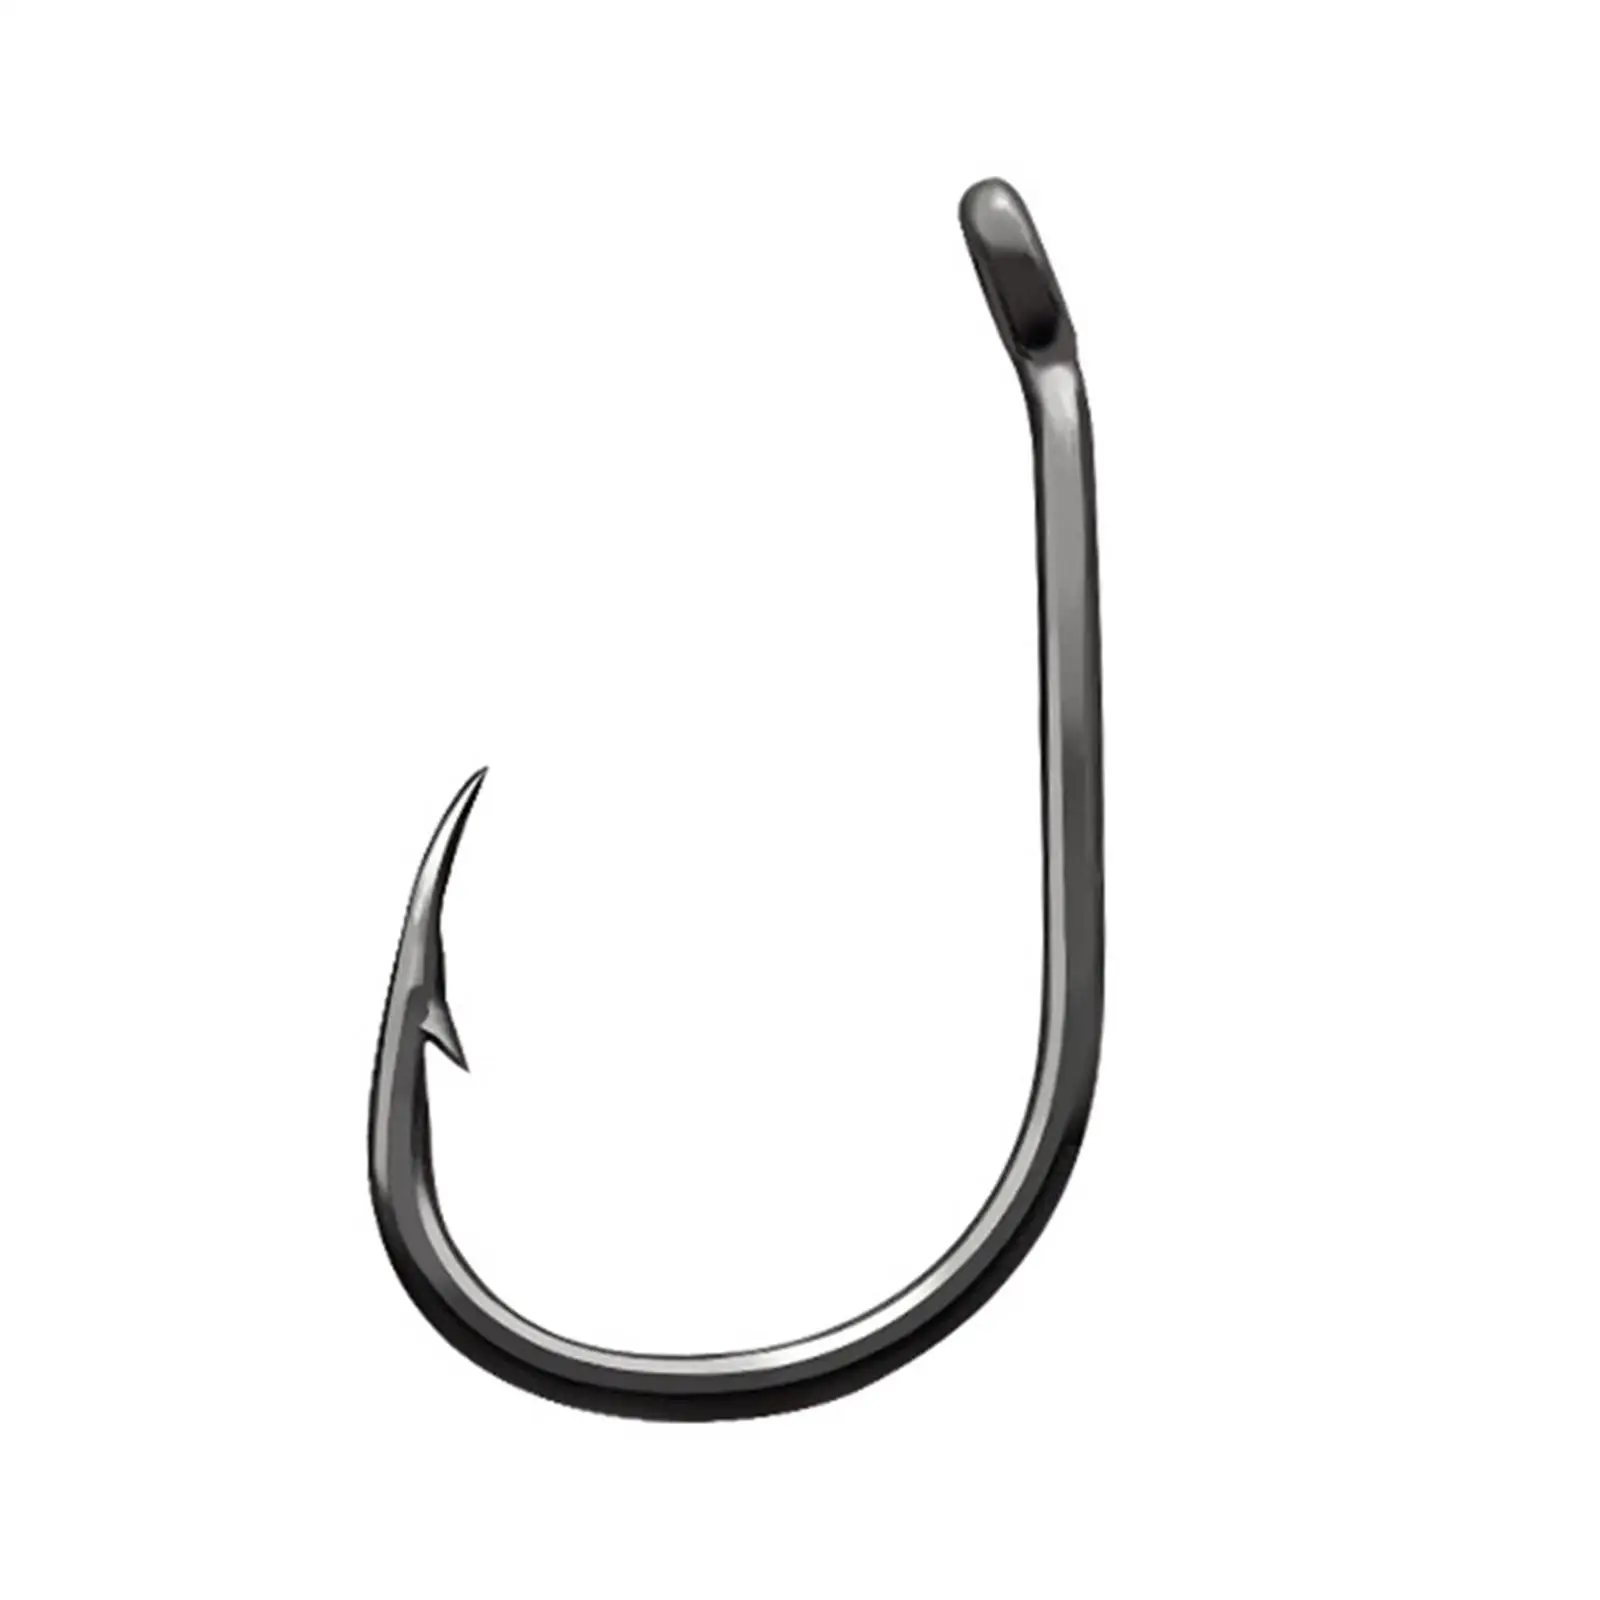 50Pcs Barb Curved Fly Fishing Hooks Fish Hooks Gear High Carbon Steel Lightweight for Tying Flies for Outdoor Sports Freshwater